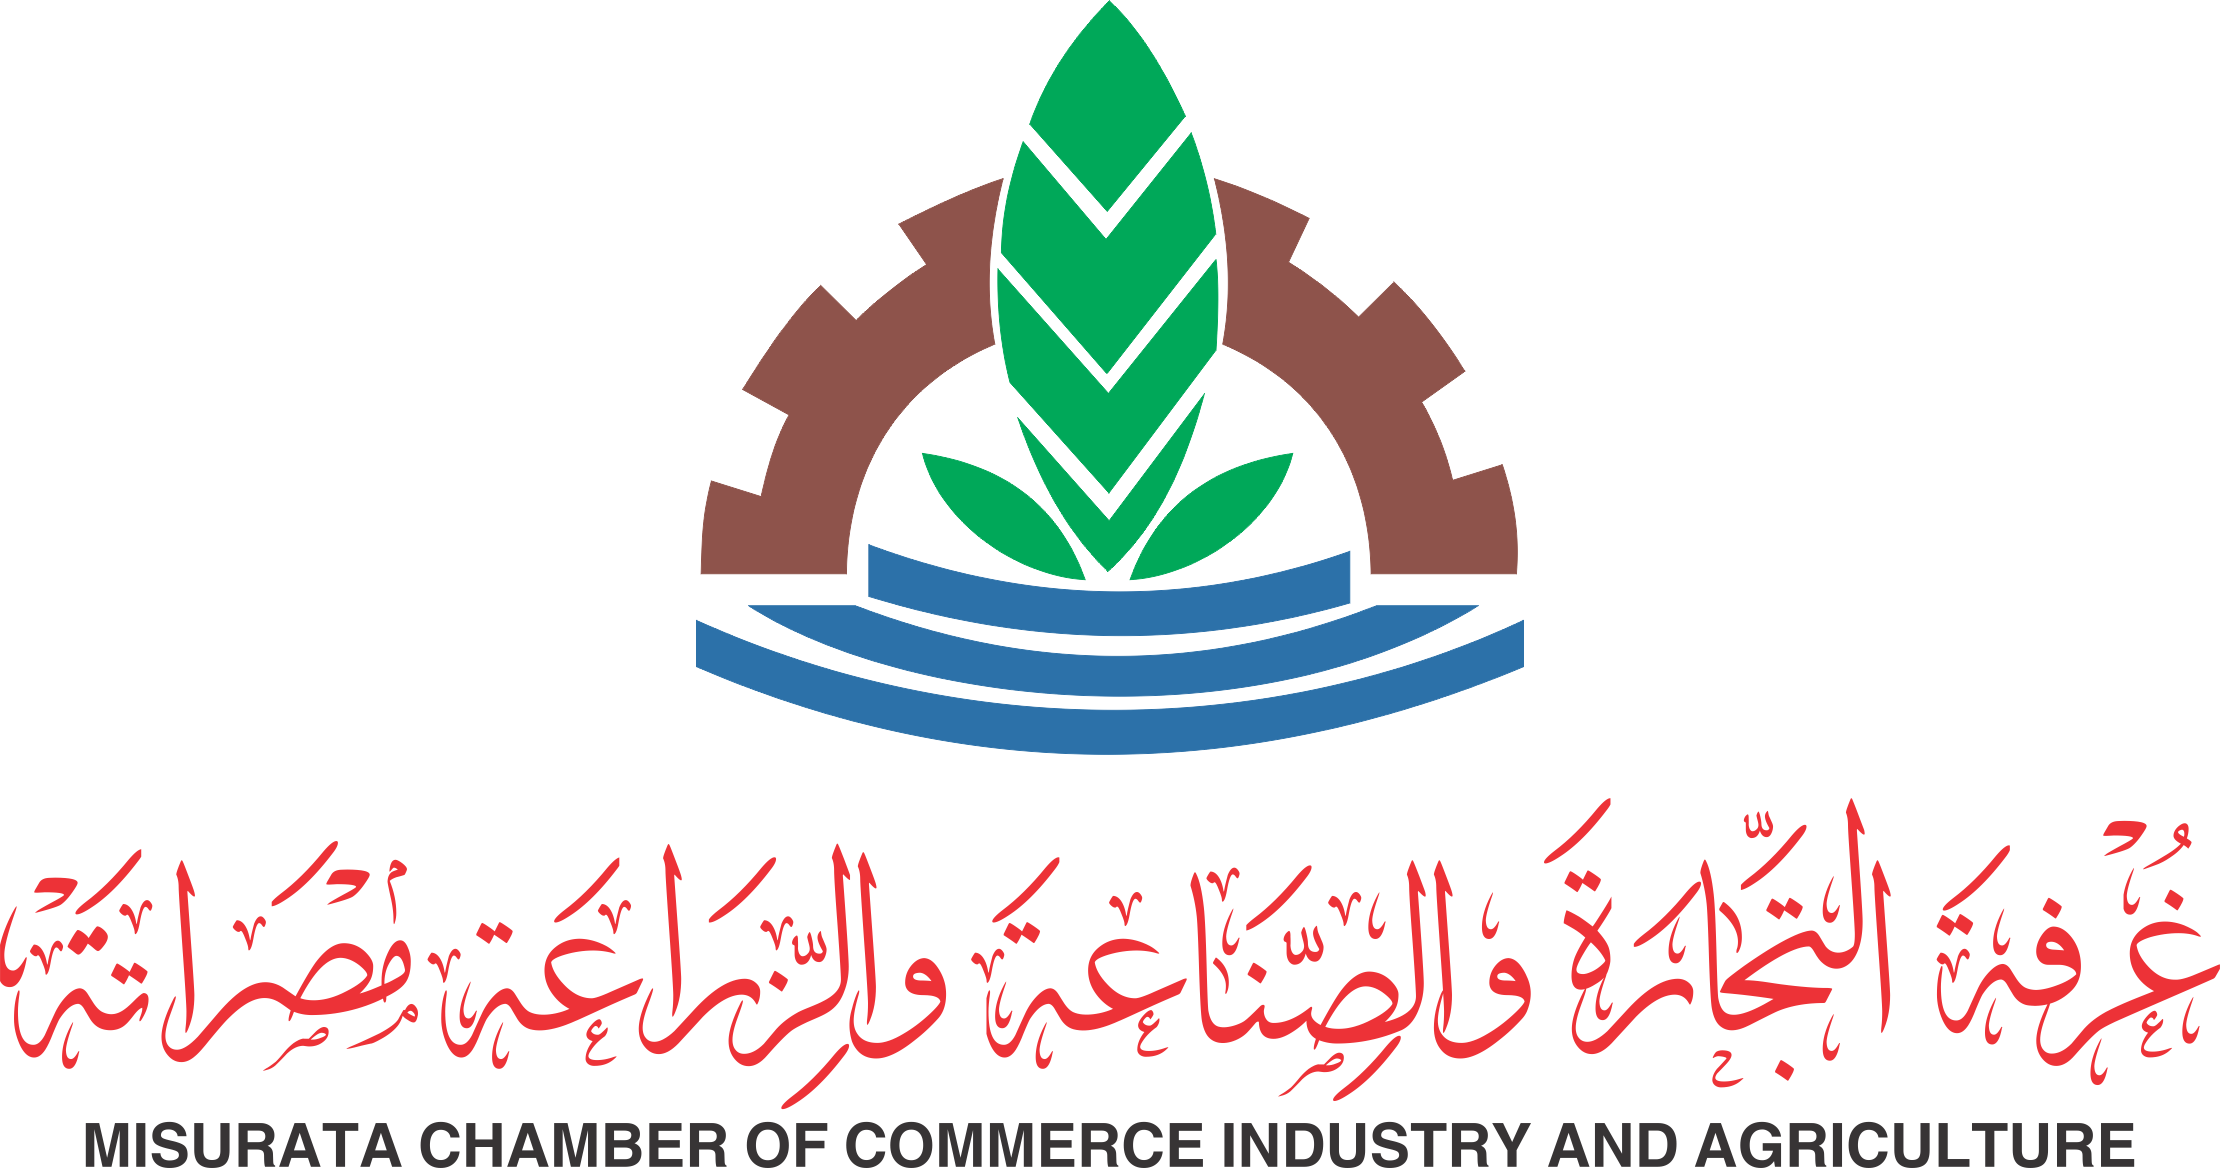 Chamber of Commerce, Agriculture and Industry Misurata